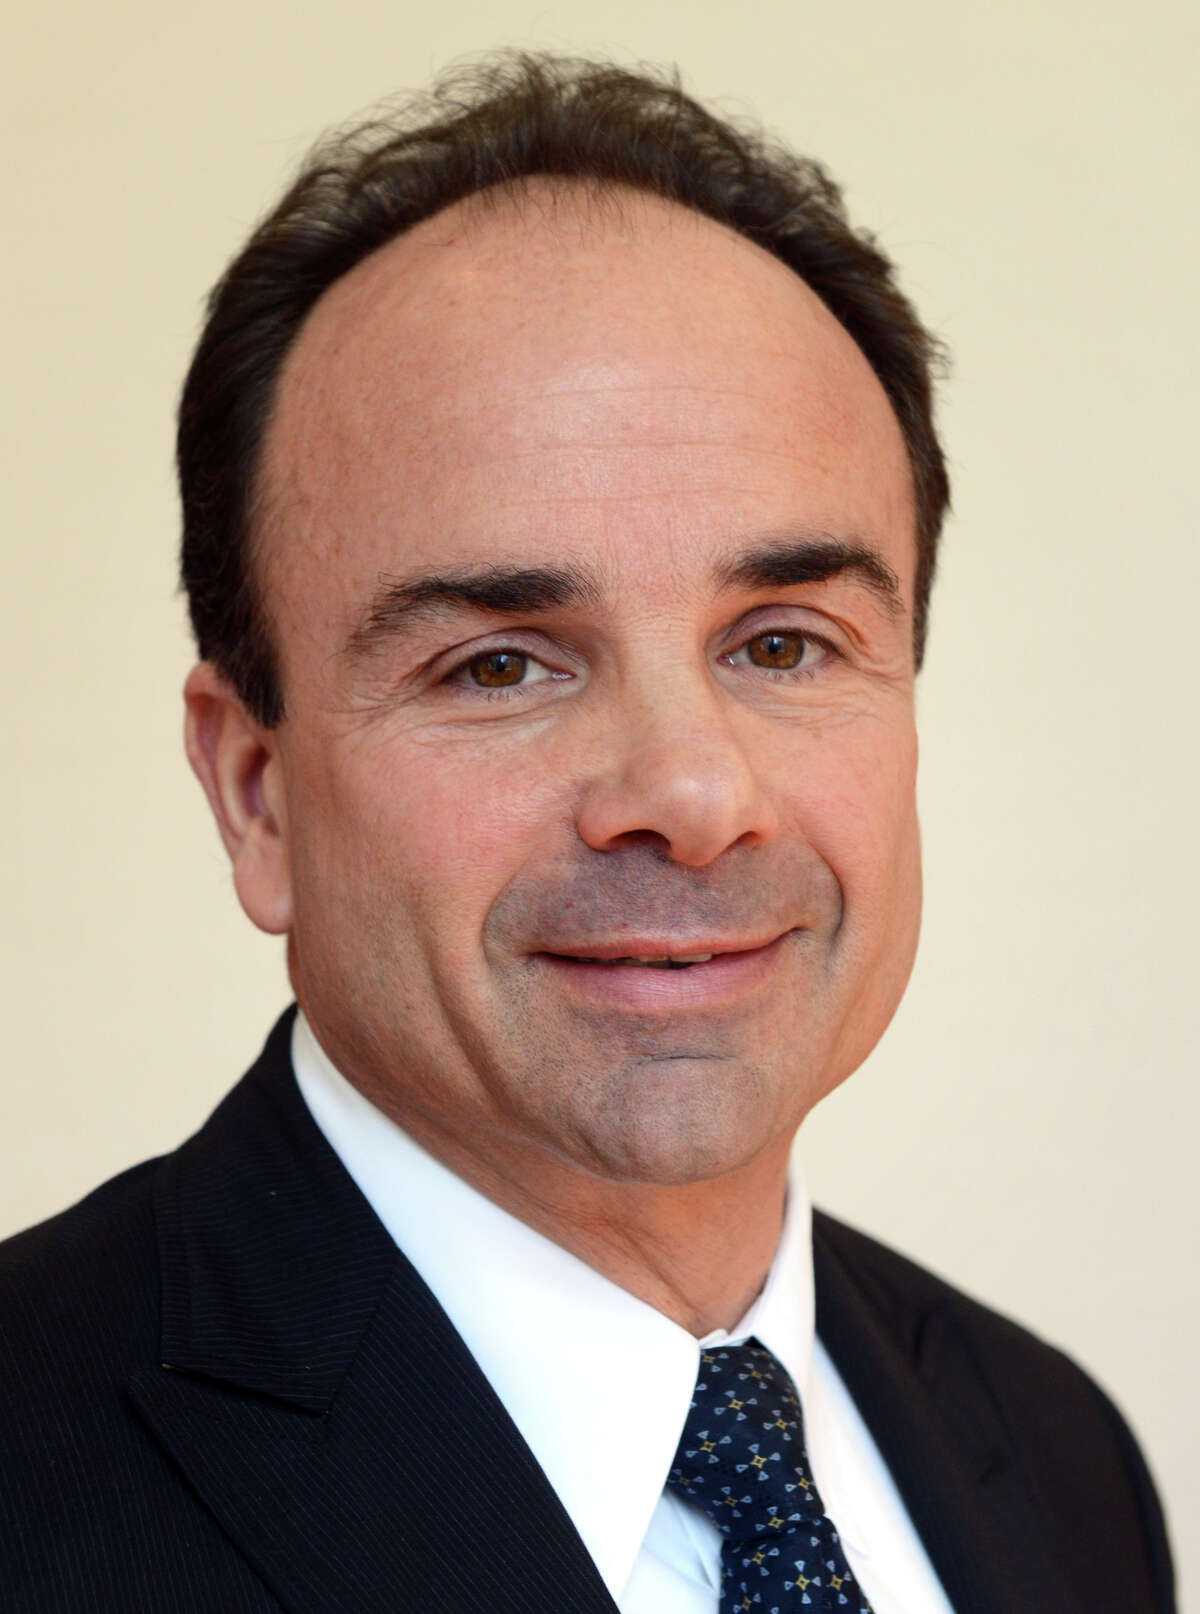 Former Bridgeport Mayor Joseph Ganim is forming an exploratory committee, the latest step in his effort to return to the mayor’s office.